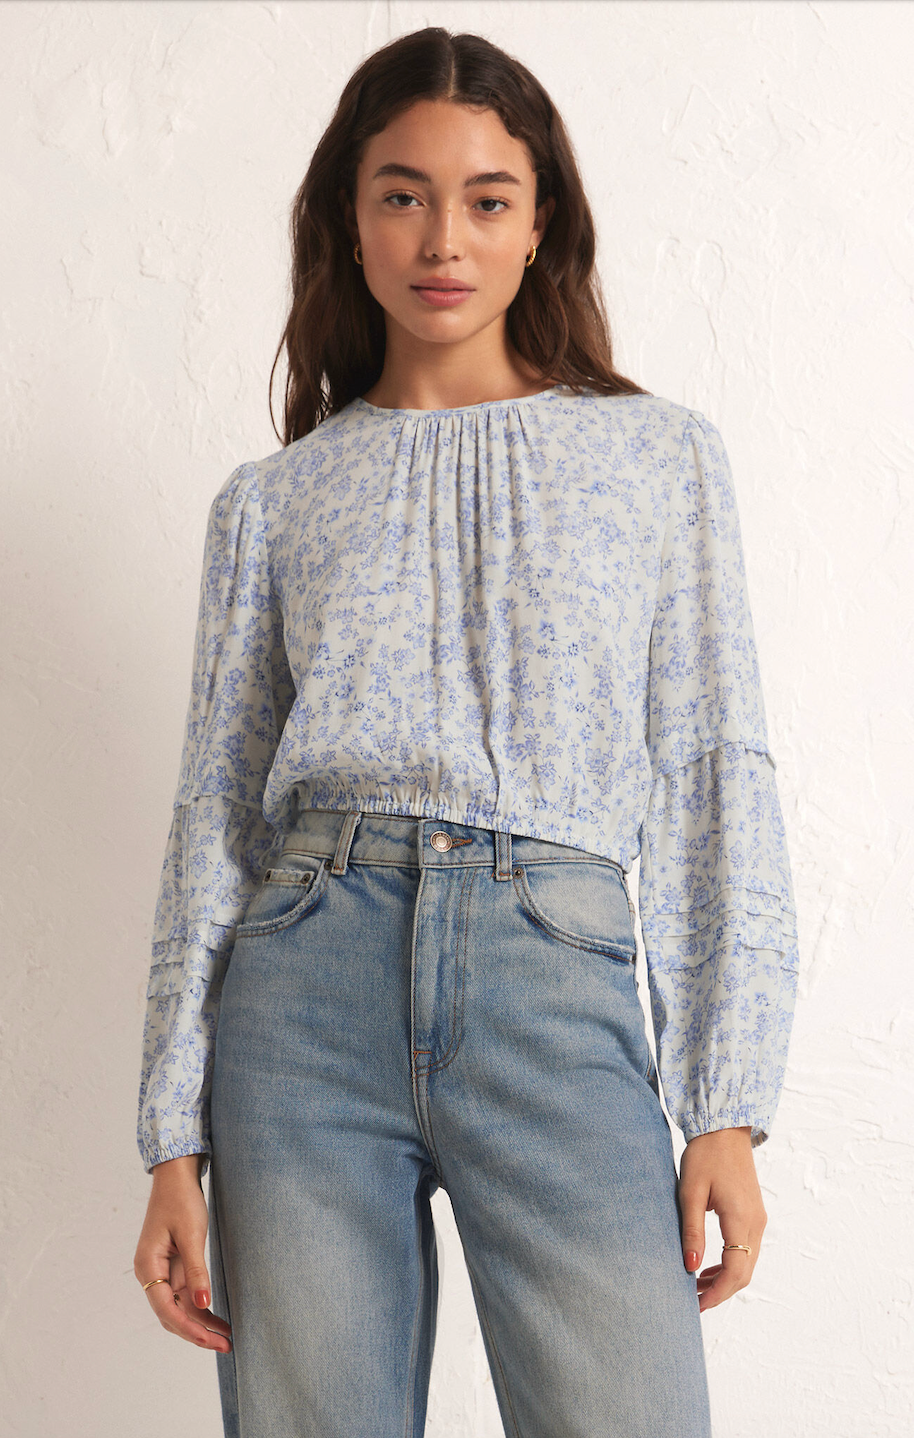 Z SUPPLY NYLAH TROPEZ FLORAL TOP IN WHITE